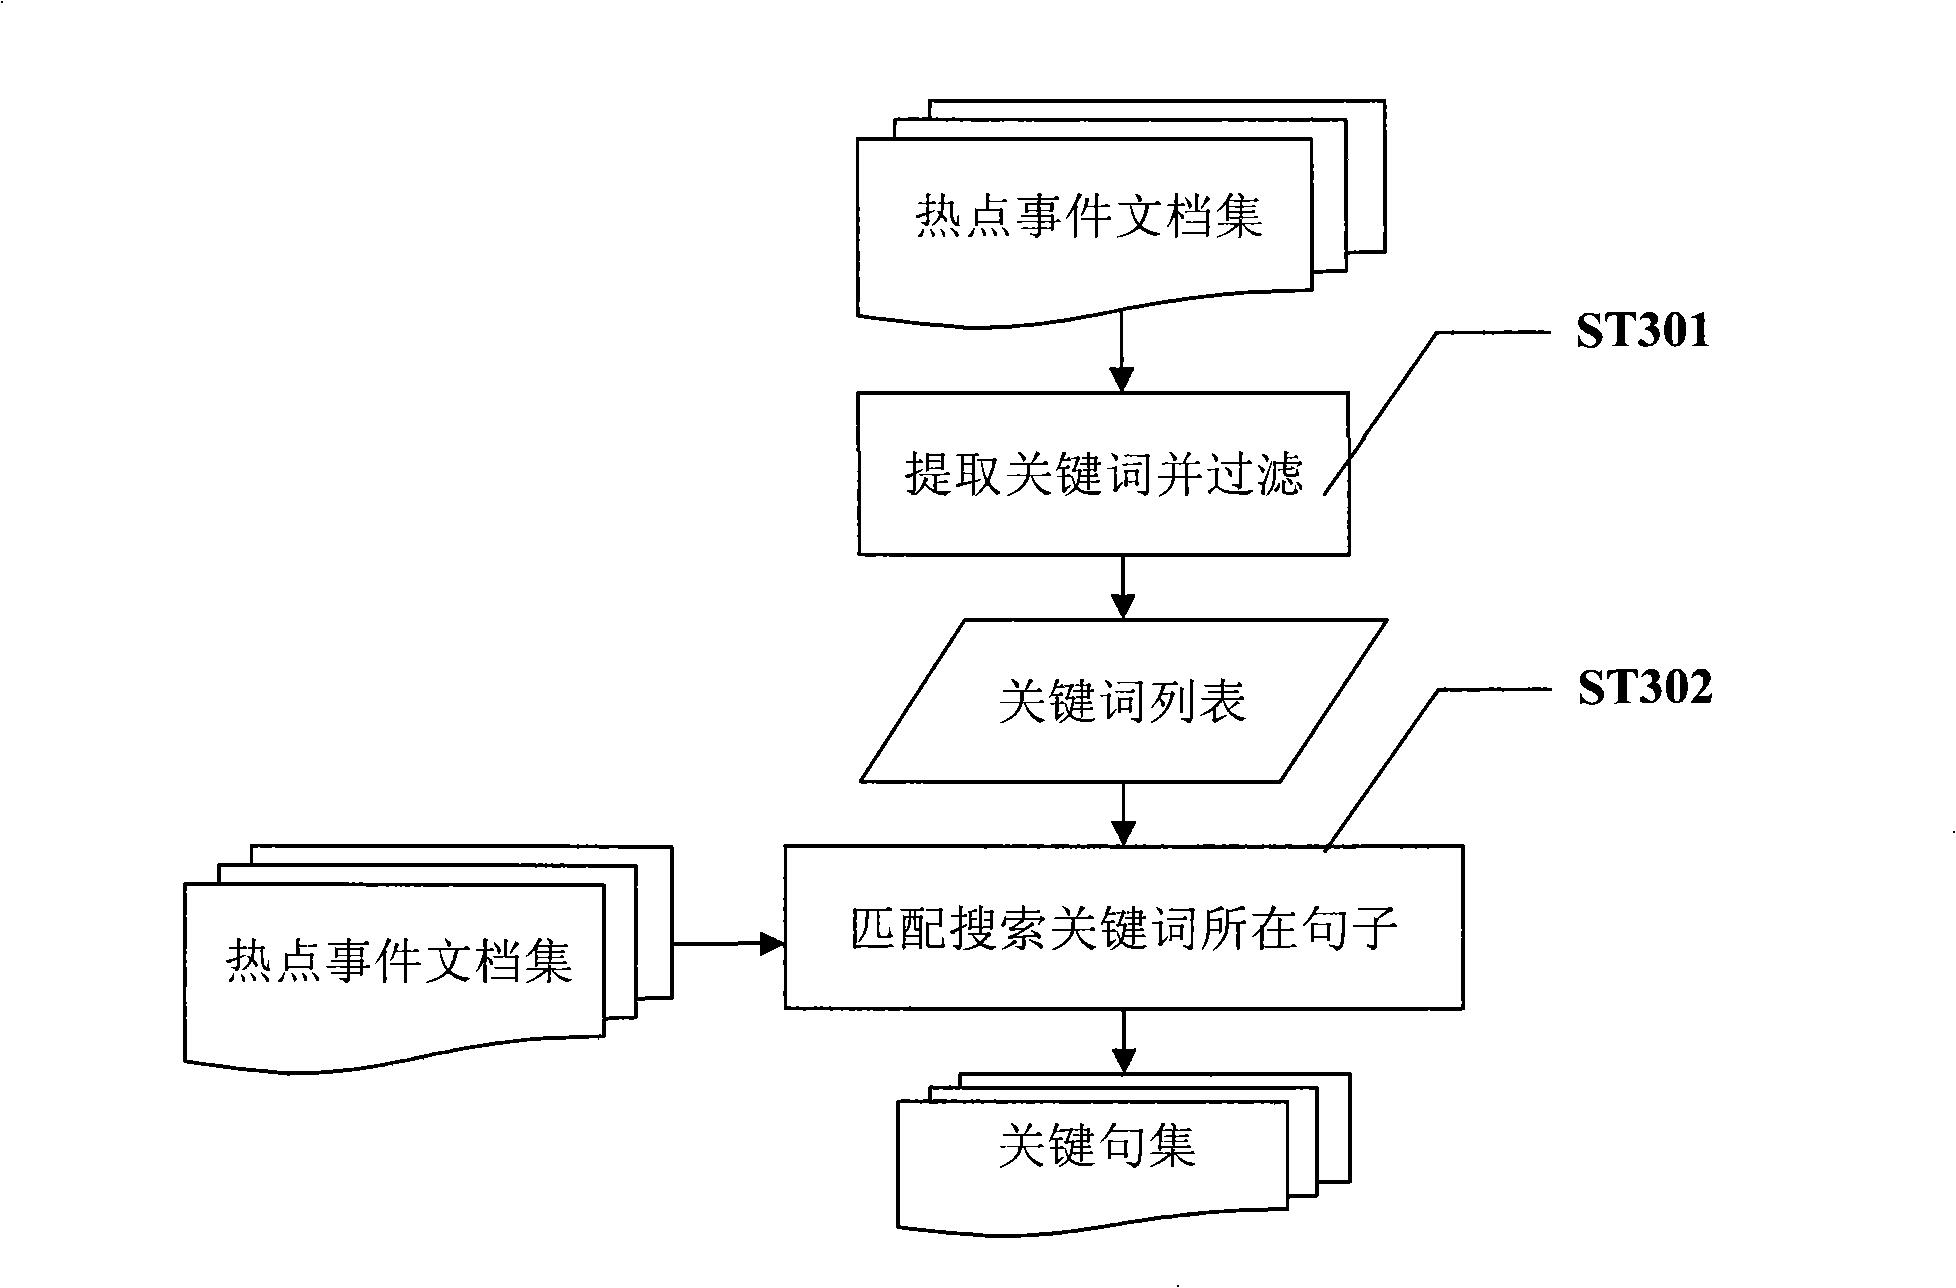 Method for collecting network public feelings viewpoint